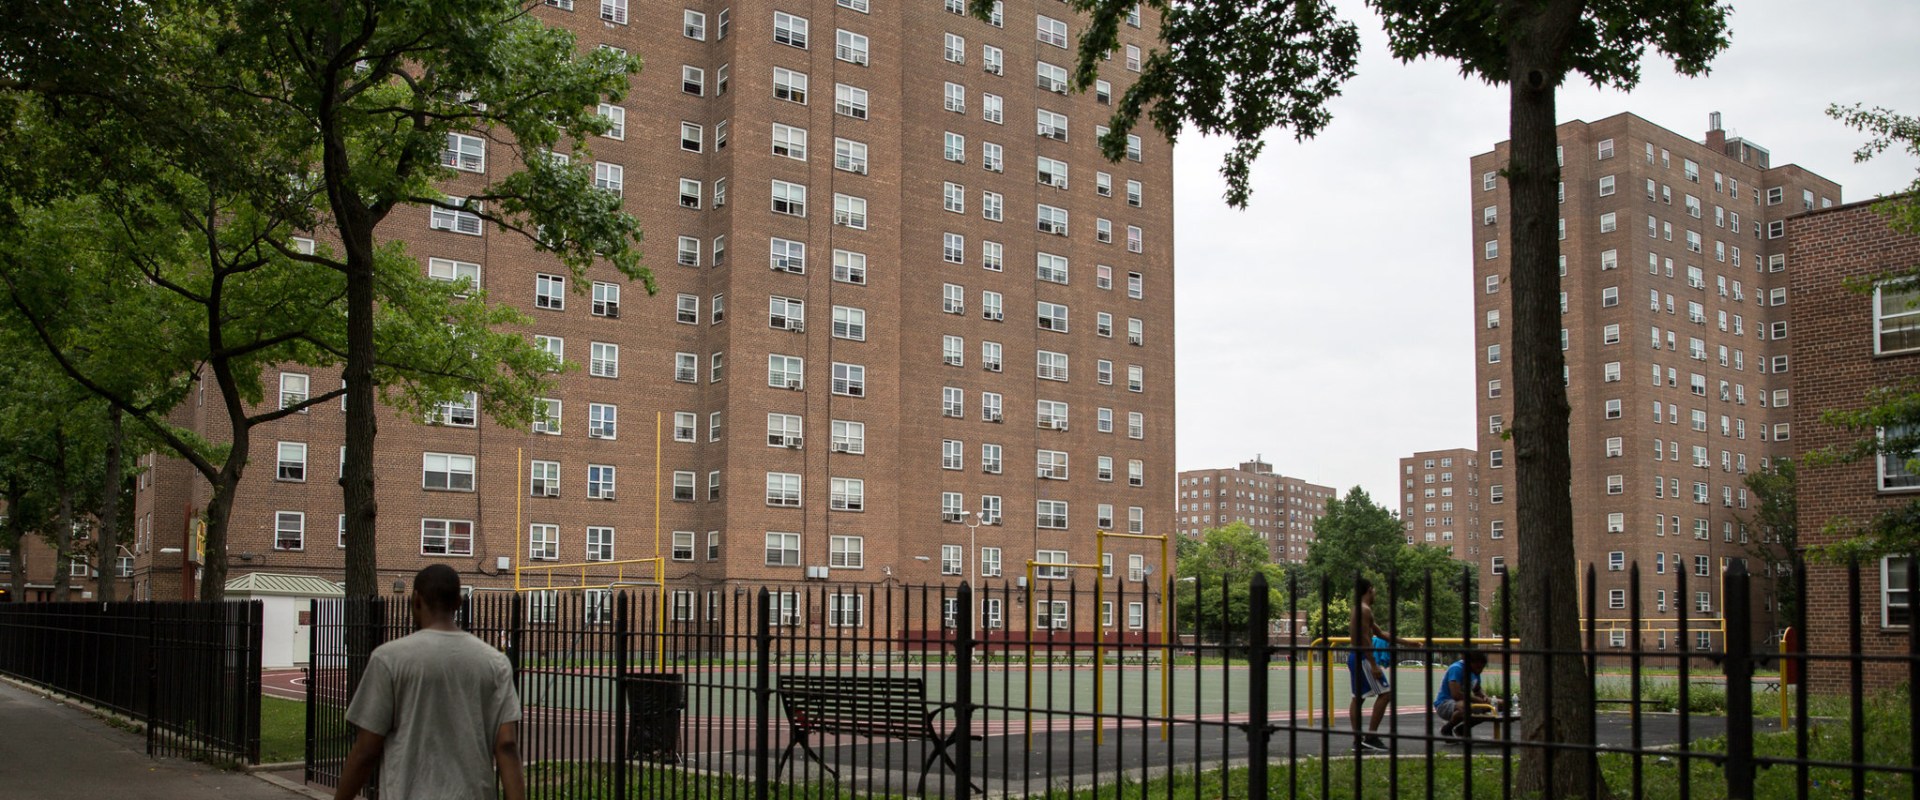 What is the role of local government in these projects in the bronx, new york?